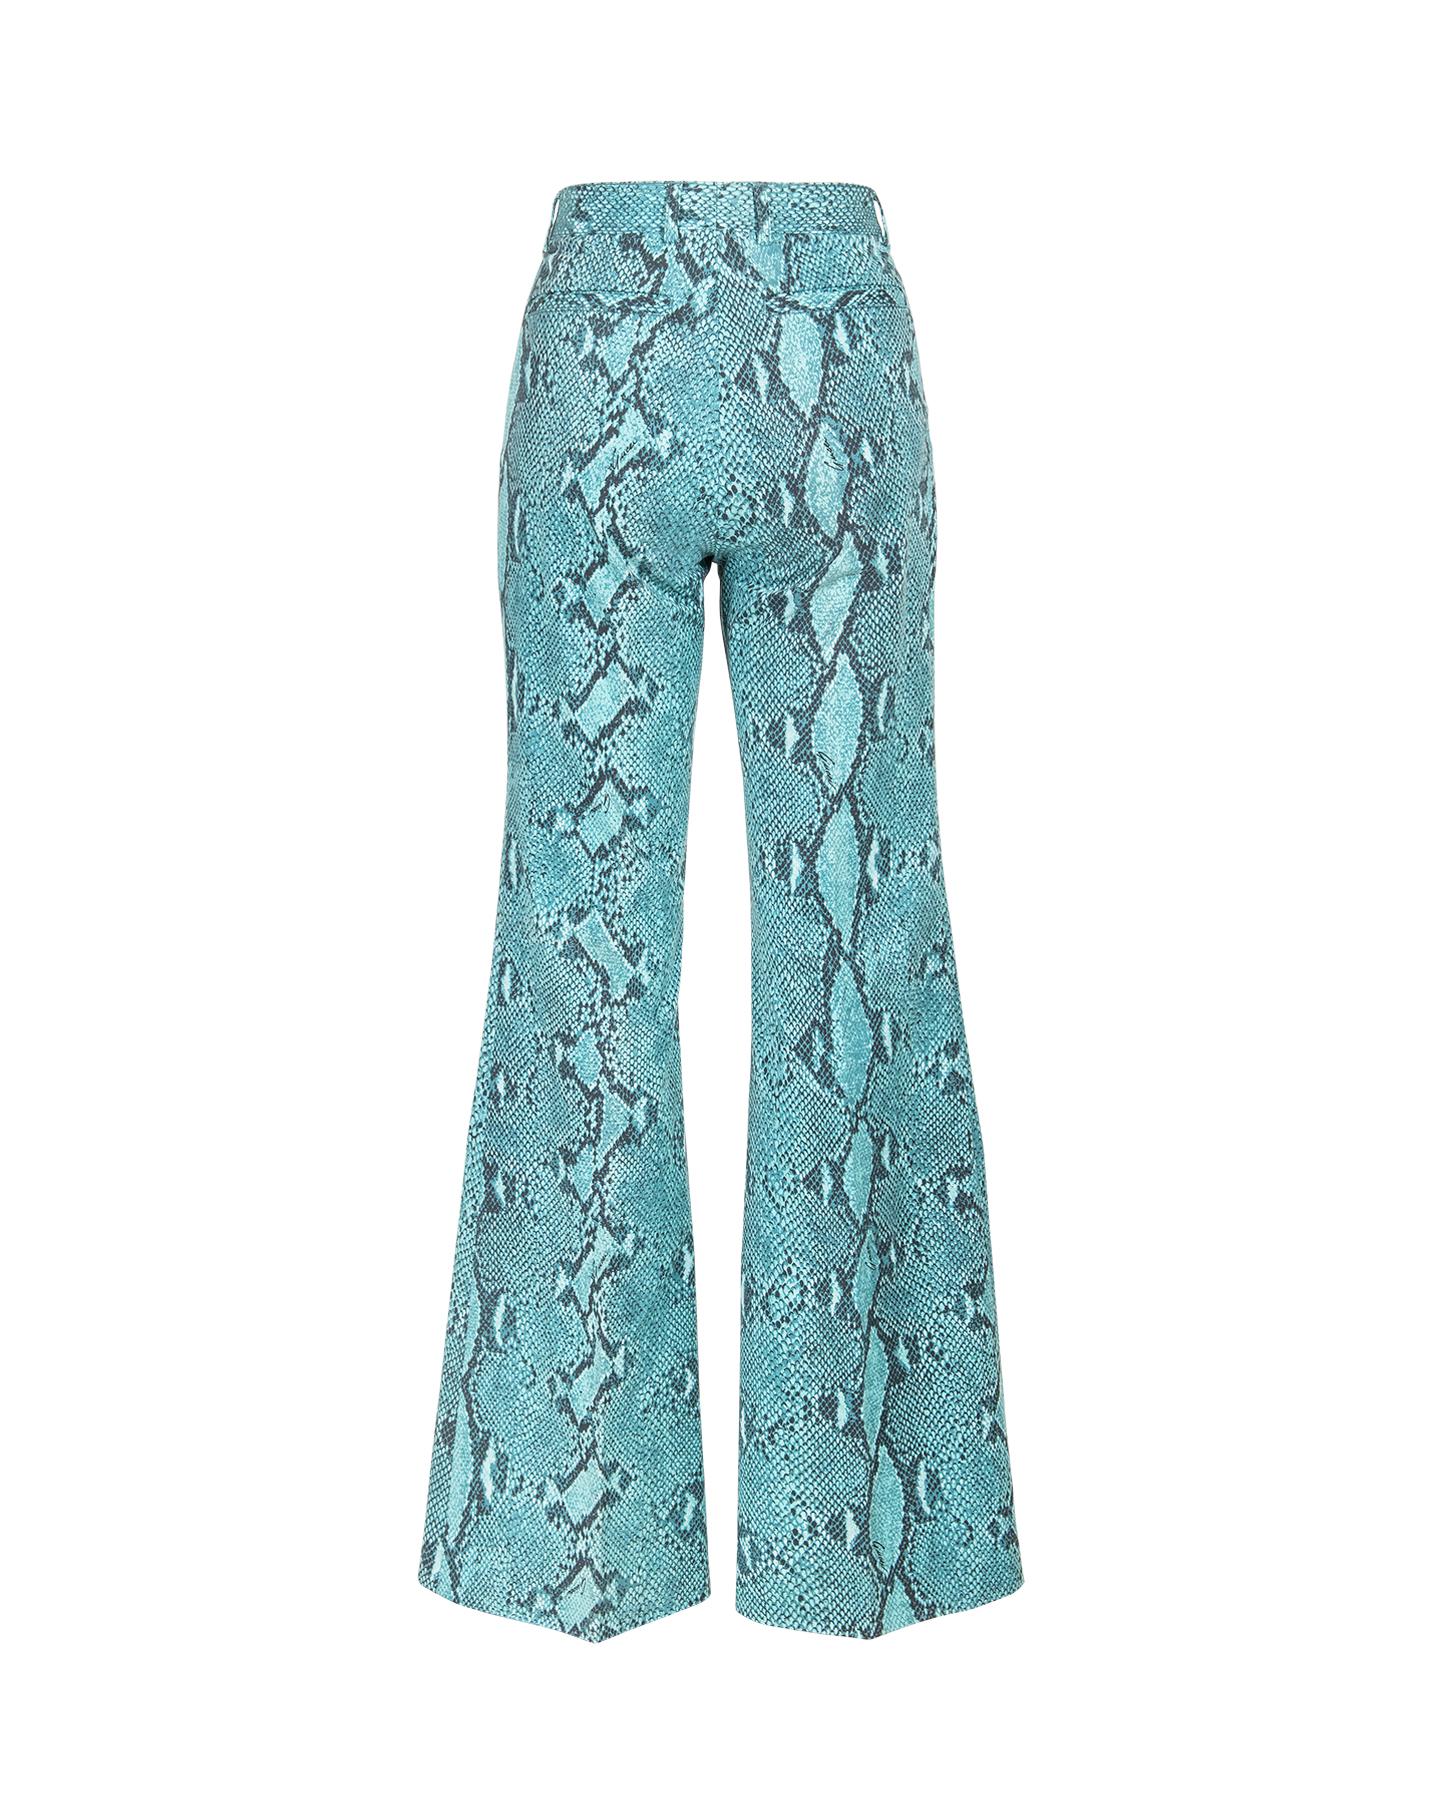 Women's S/S 2000 Gucci by Tom Ford Turquoise Snakeskin Trousers